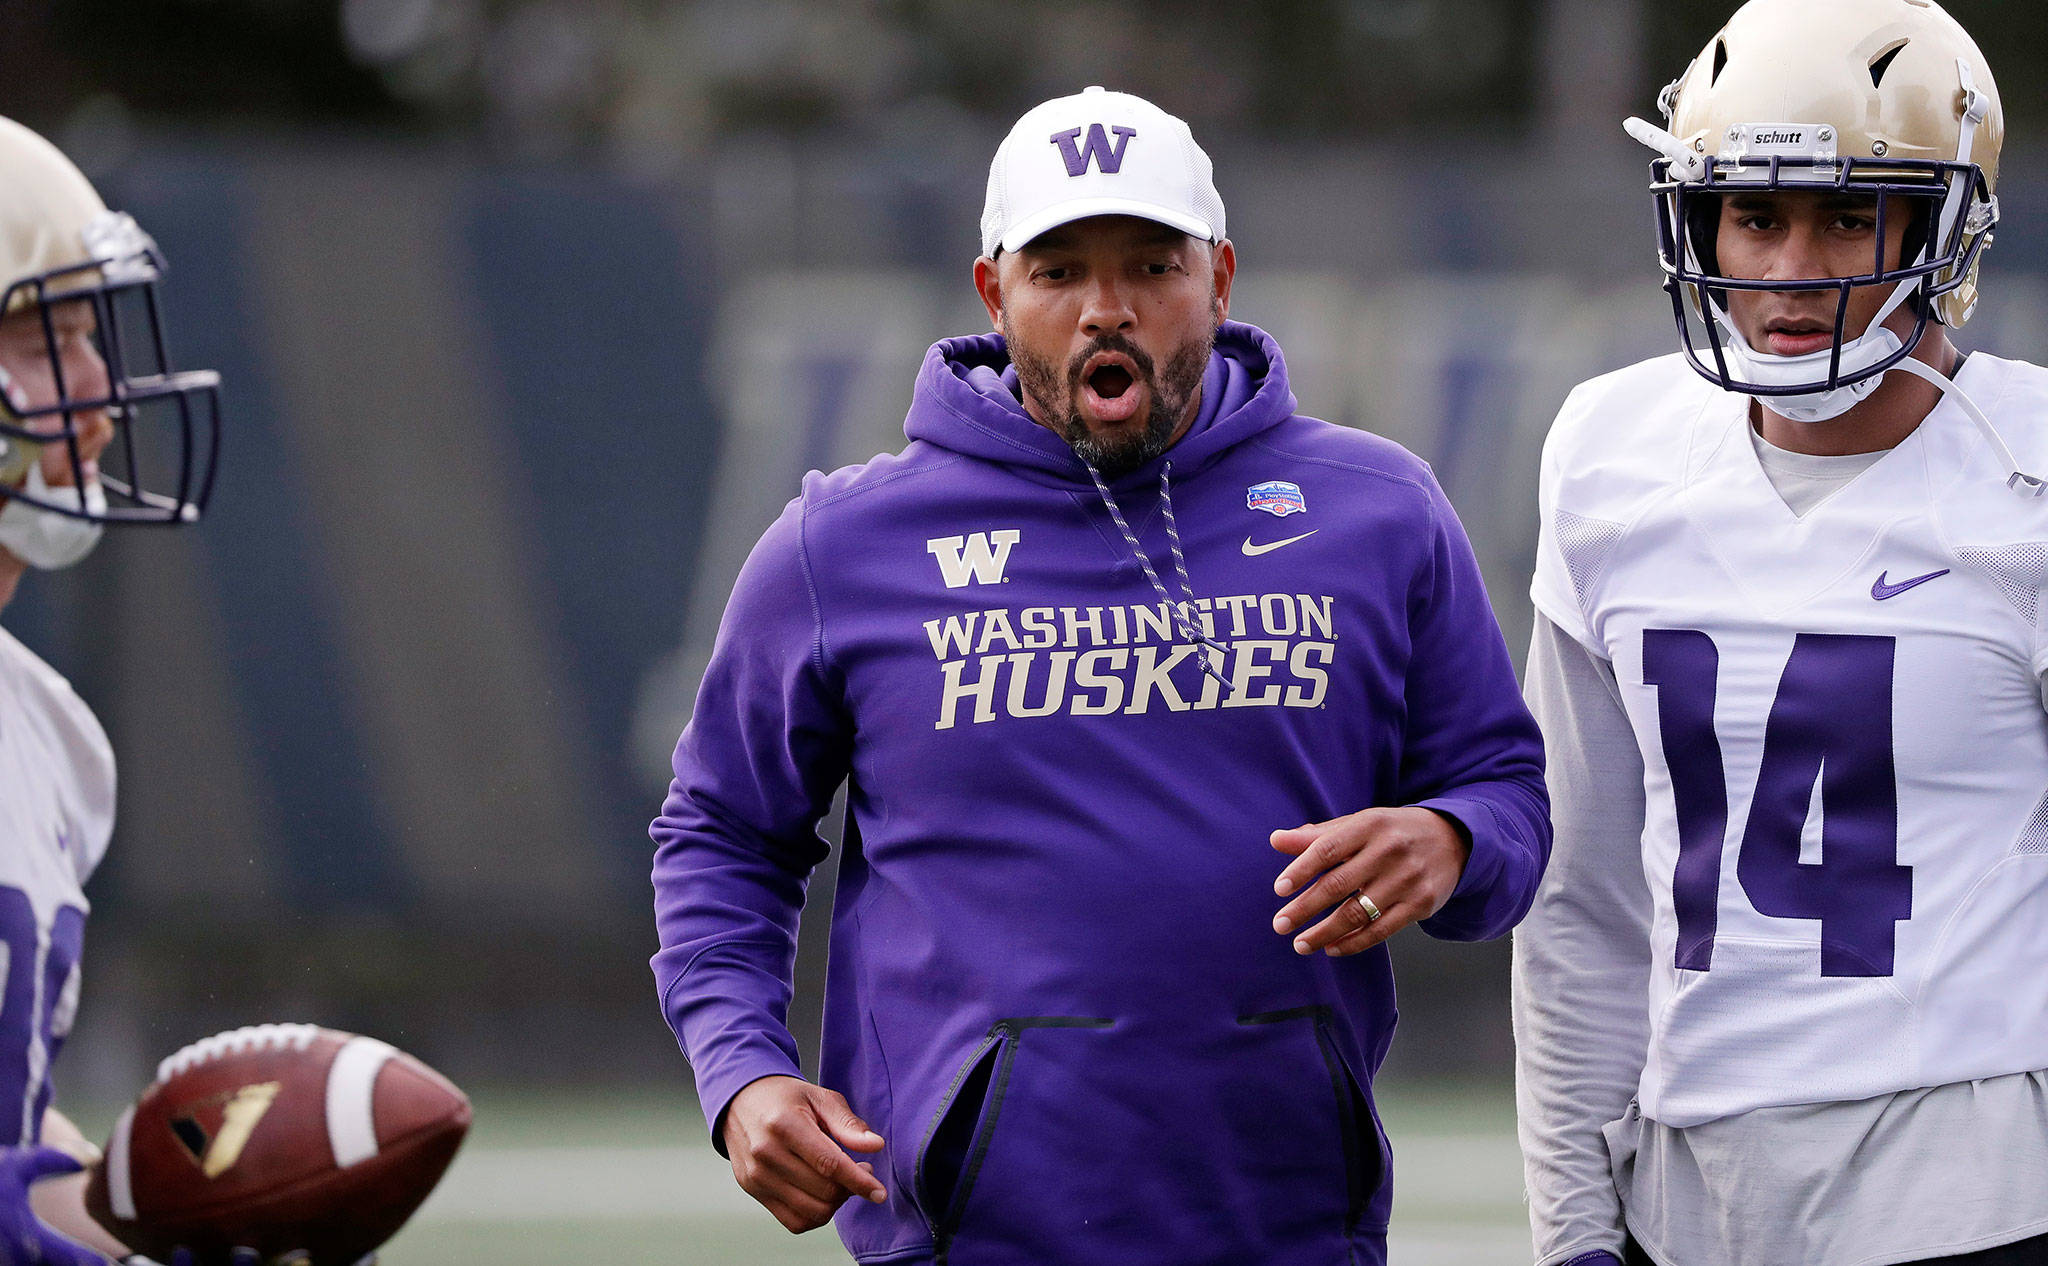 Washington head coach Jimmy Lake says if college football is played in the spring it should be limited to eight games. (AP Photo/Elaine Thompson)